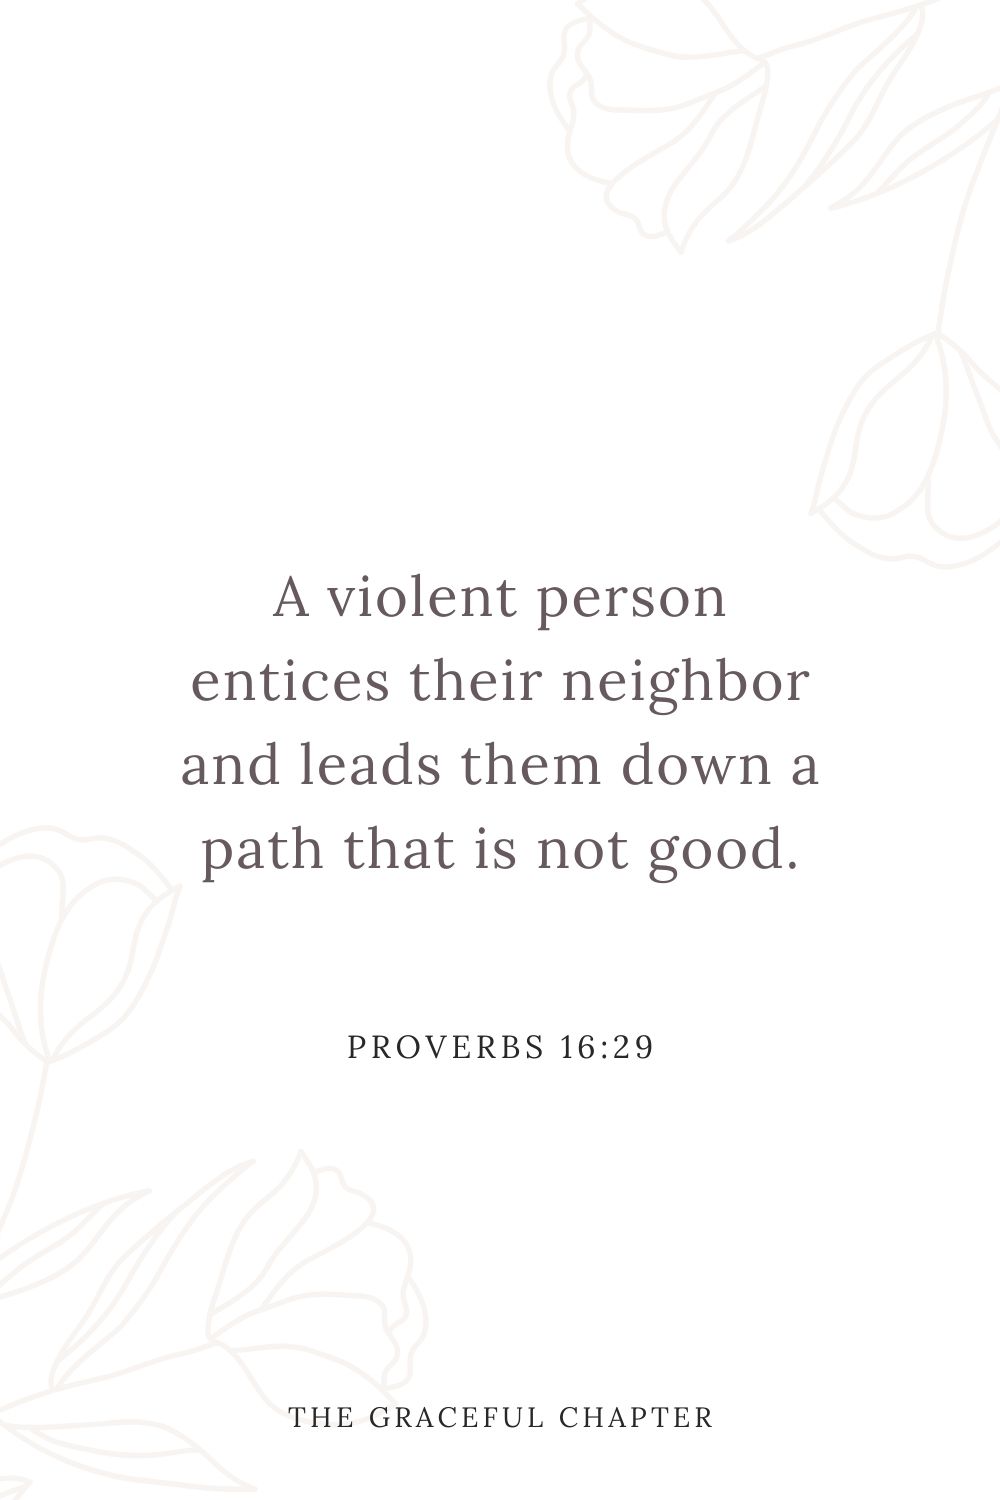 A violent person entices their neighbor and leads them down a path that is not good. Proverbs 16:29